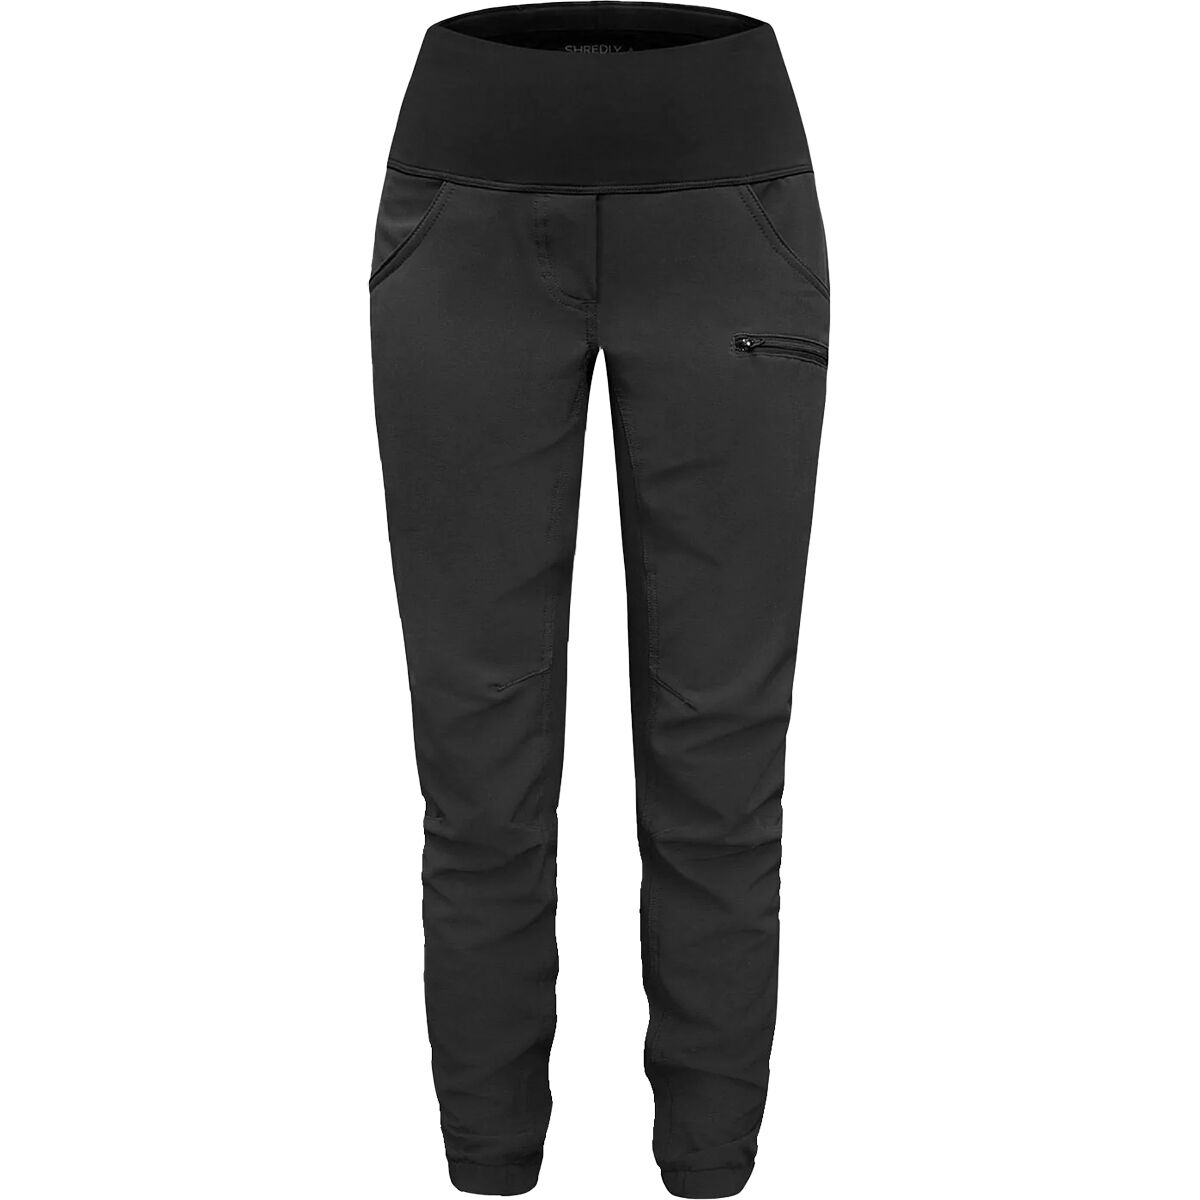 SHREDLY Limitless - Stretch Waistband High-Rise Pant - Women's